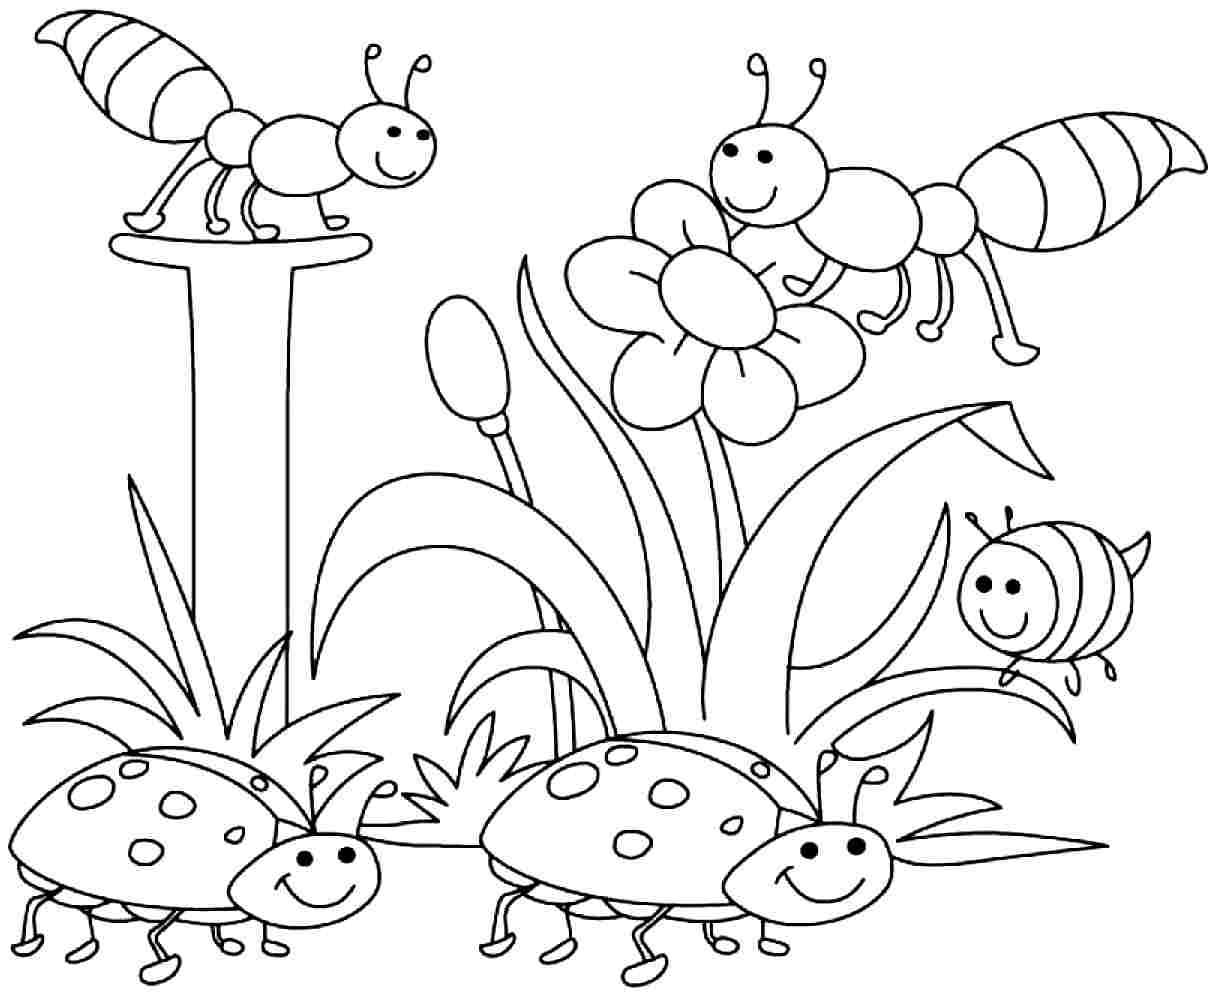 5 Best Images of Spring Season Coloring Pages Printable ...